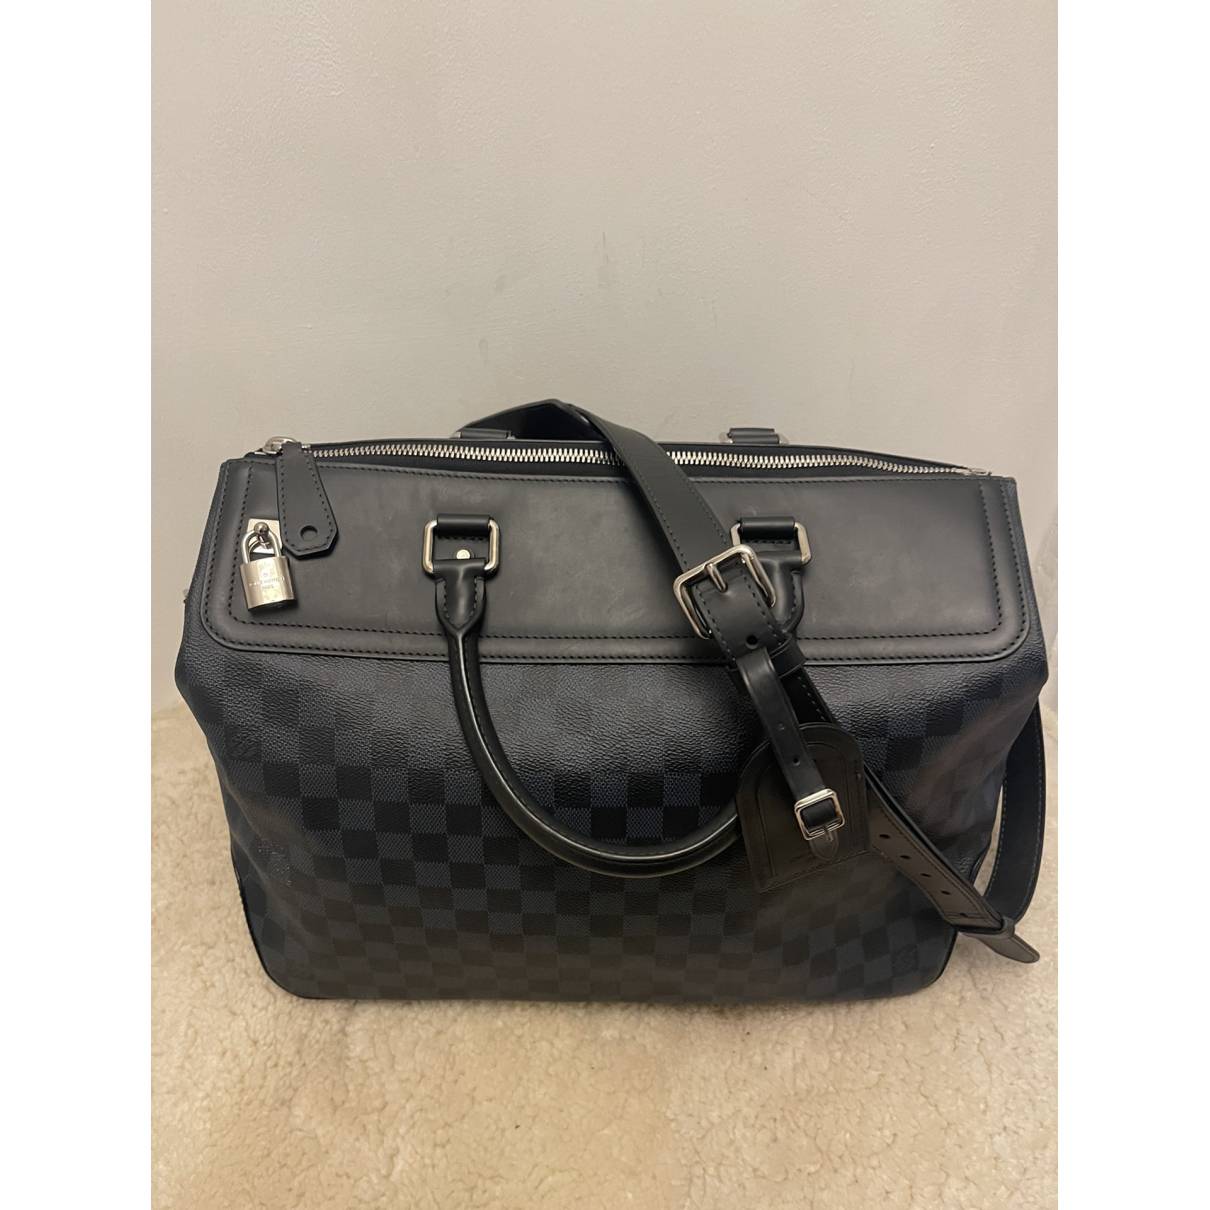 Neo Greenwich leather travel bag